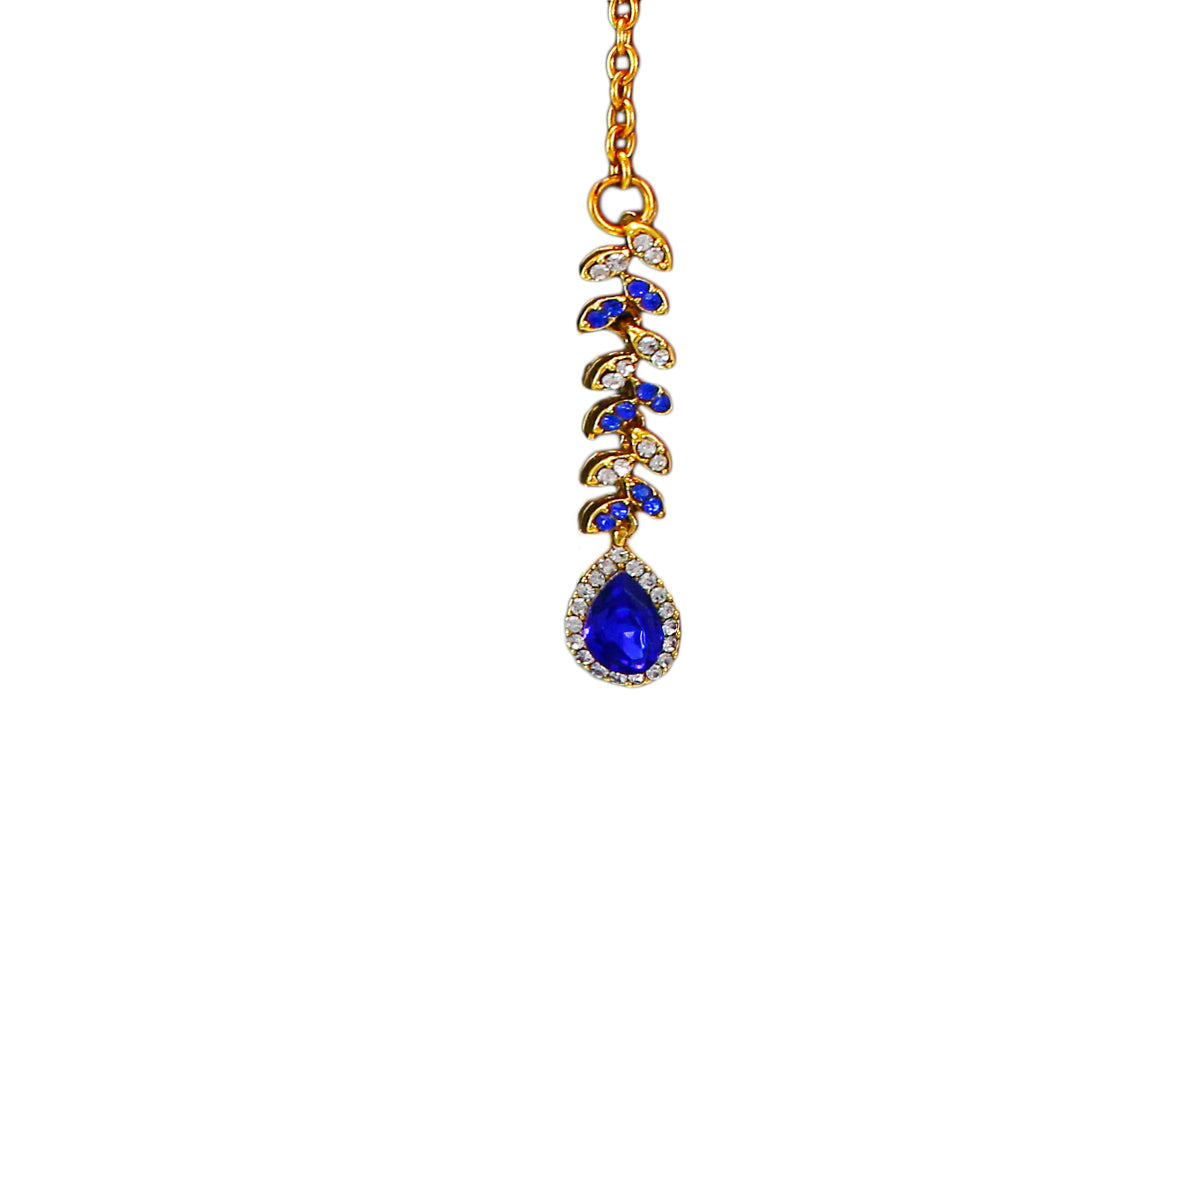 Royal Gold Plated Designer Kundan Stone  Leaf Design Necklace and  Dangler Earrings with White Blue Stones  with Mangtika